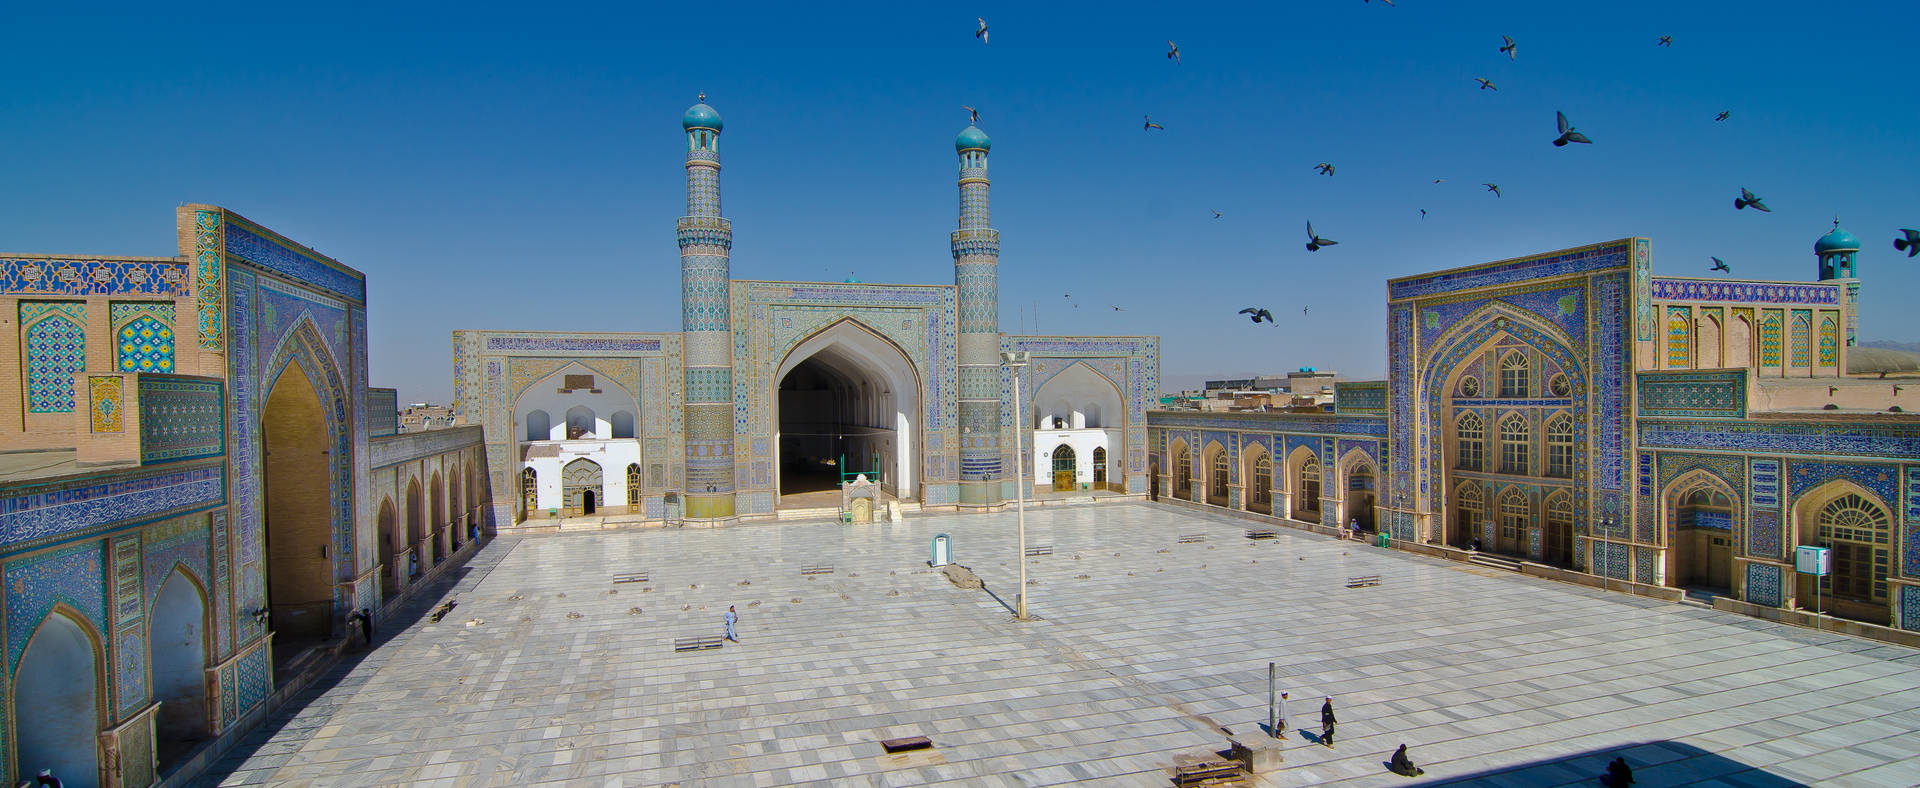 Afghanistan Herat Central Blue Mosque Background